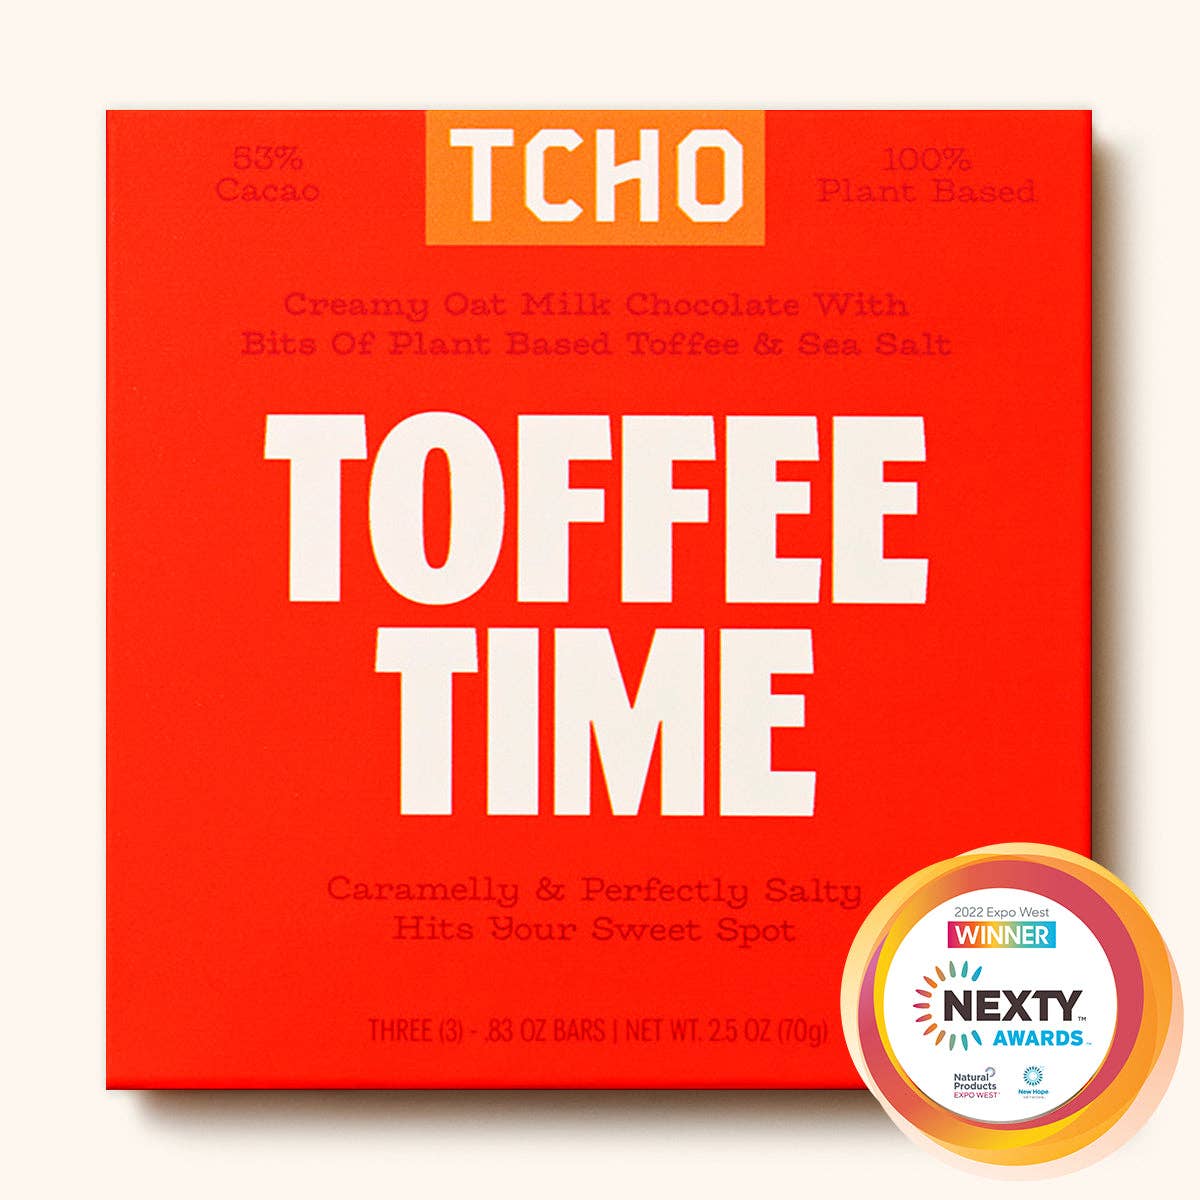 TCHO - Toffee Time: 1 Pack